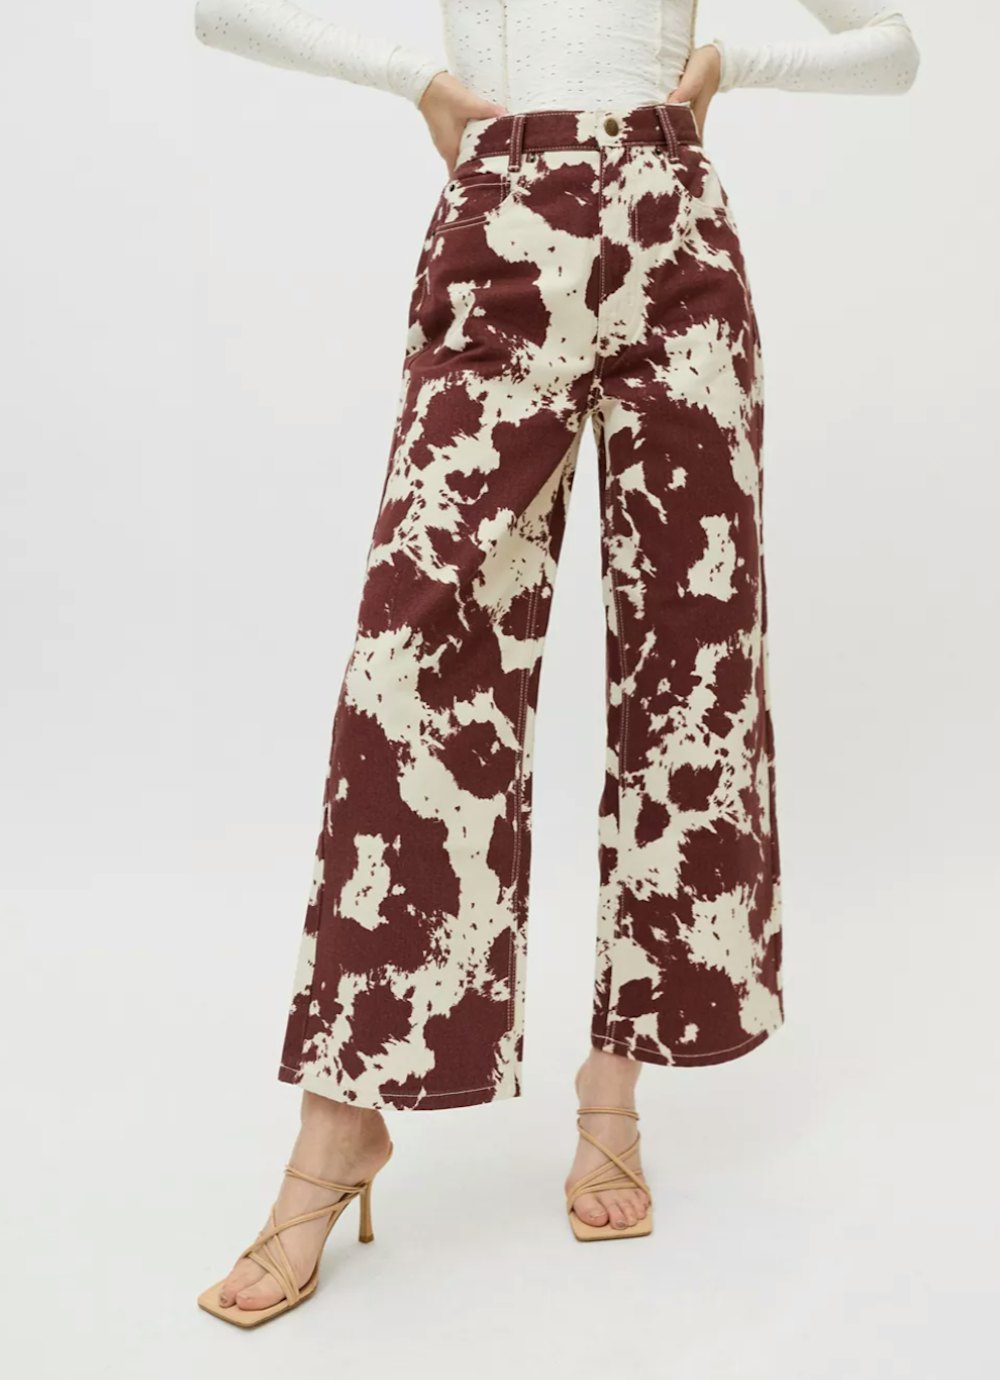 Cow Print Is One Of Fall's Best Trends — Here's 22 Pieces To Shop